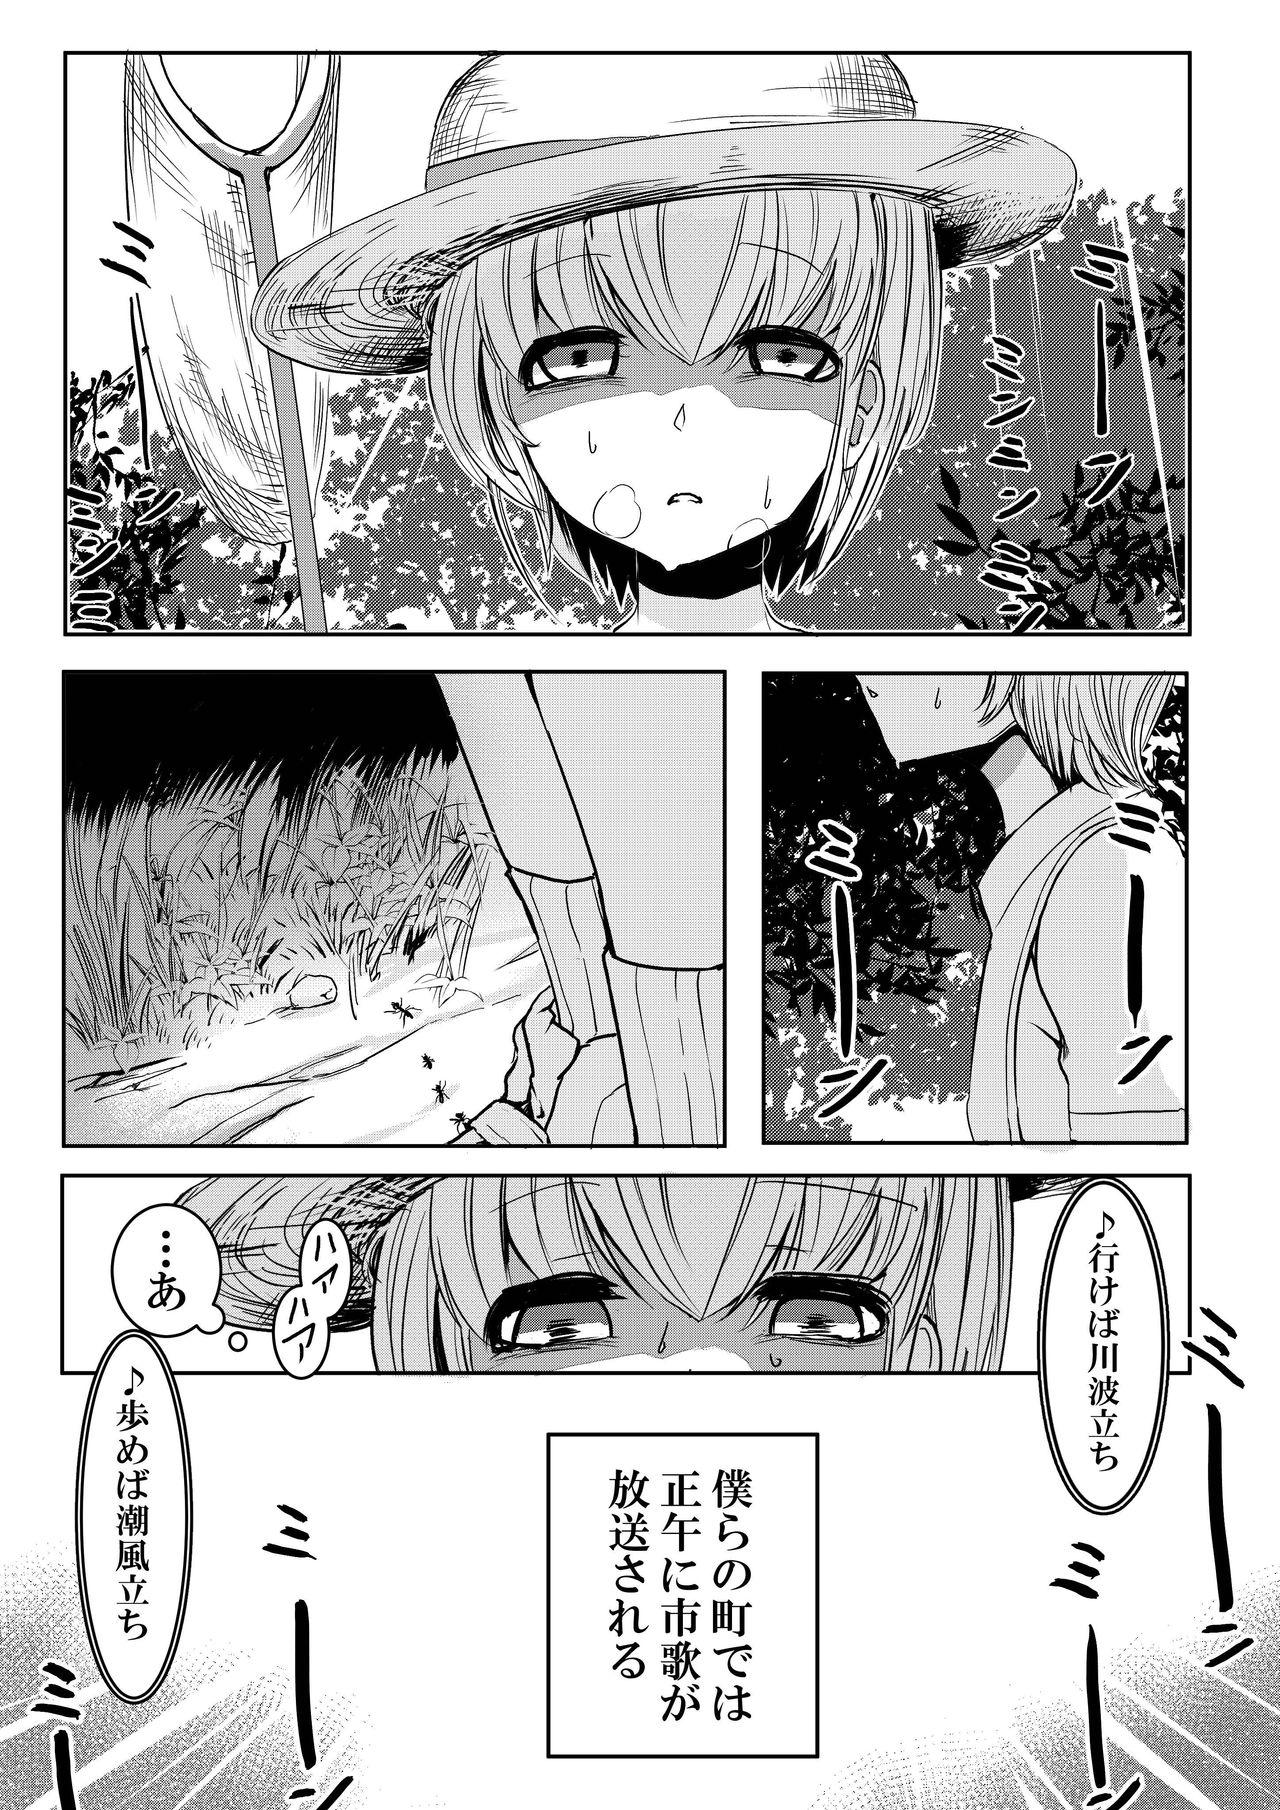 Pigtails Mori no Oku de Onee-chan to French Porn - Page 9